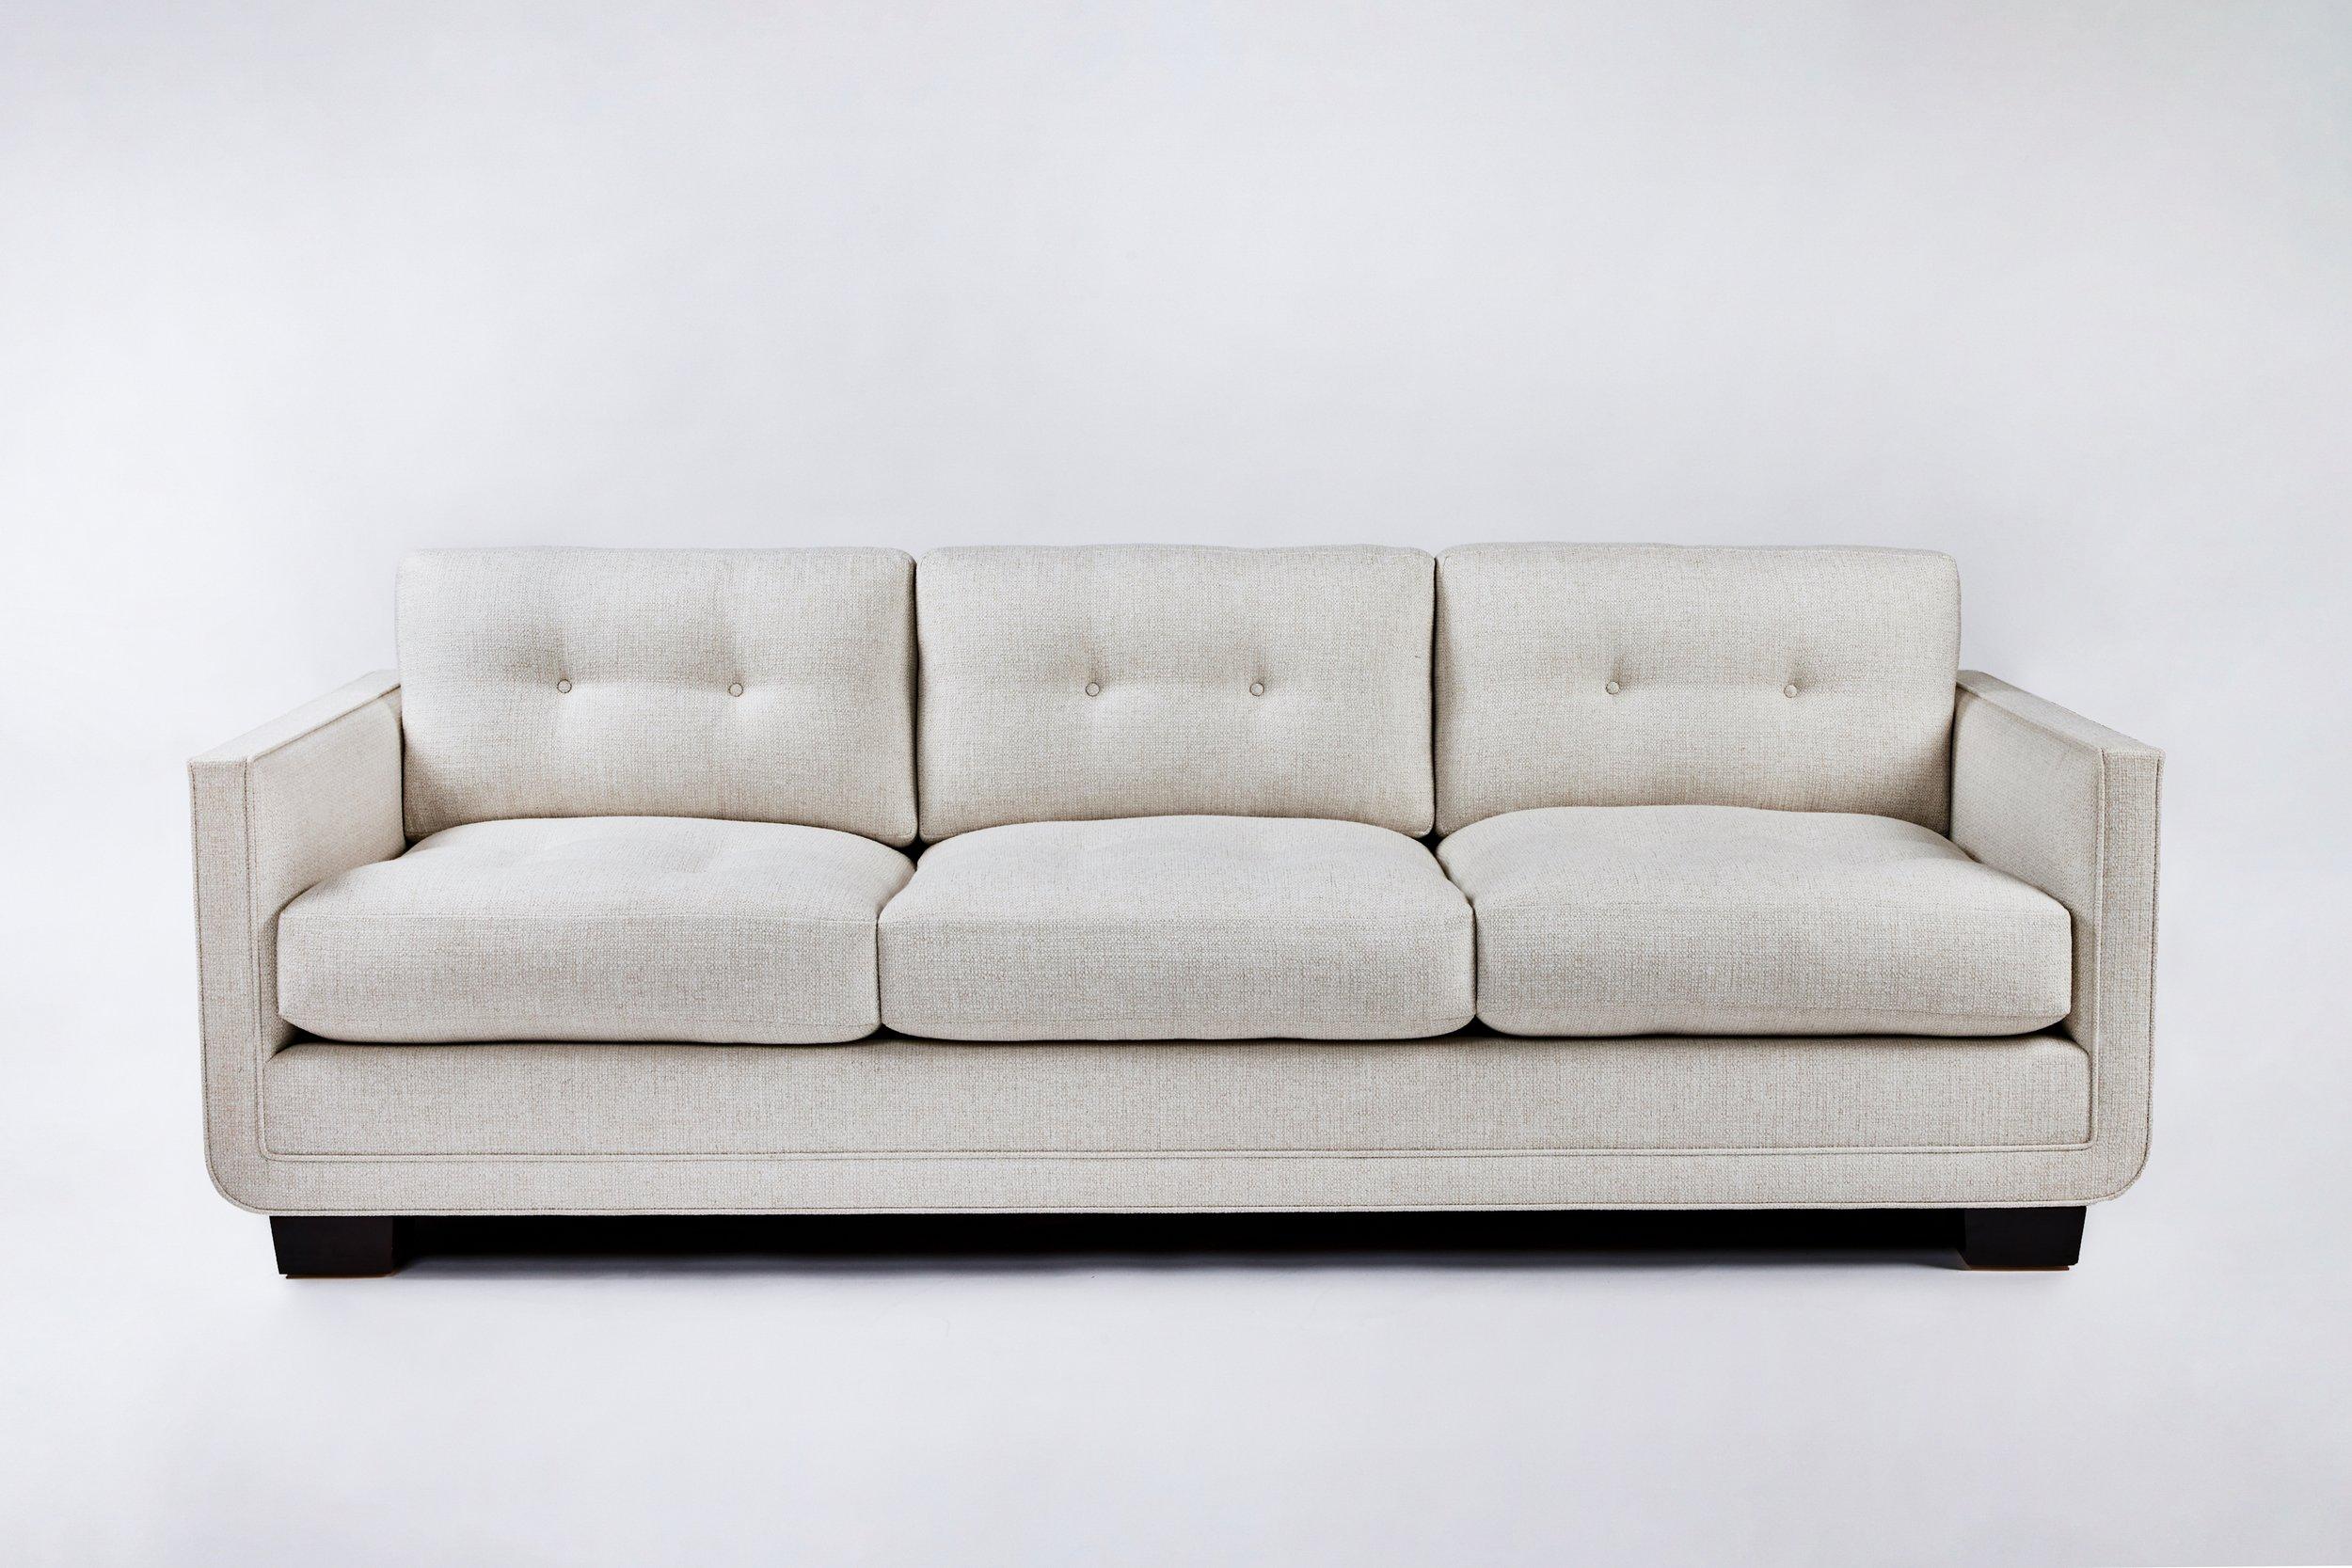 Martin & Brockett's Harrison Tufted Sofa 84” consists of a streamlined frame that curves at the base to hold a deep but tidy (3 over 3) mix of loose tufted back and seat cushions.

Other sizes and wood finishes available.

Sold as C.O.M. only. - 18